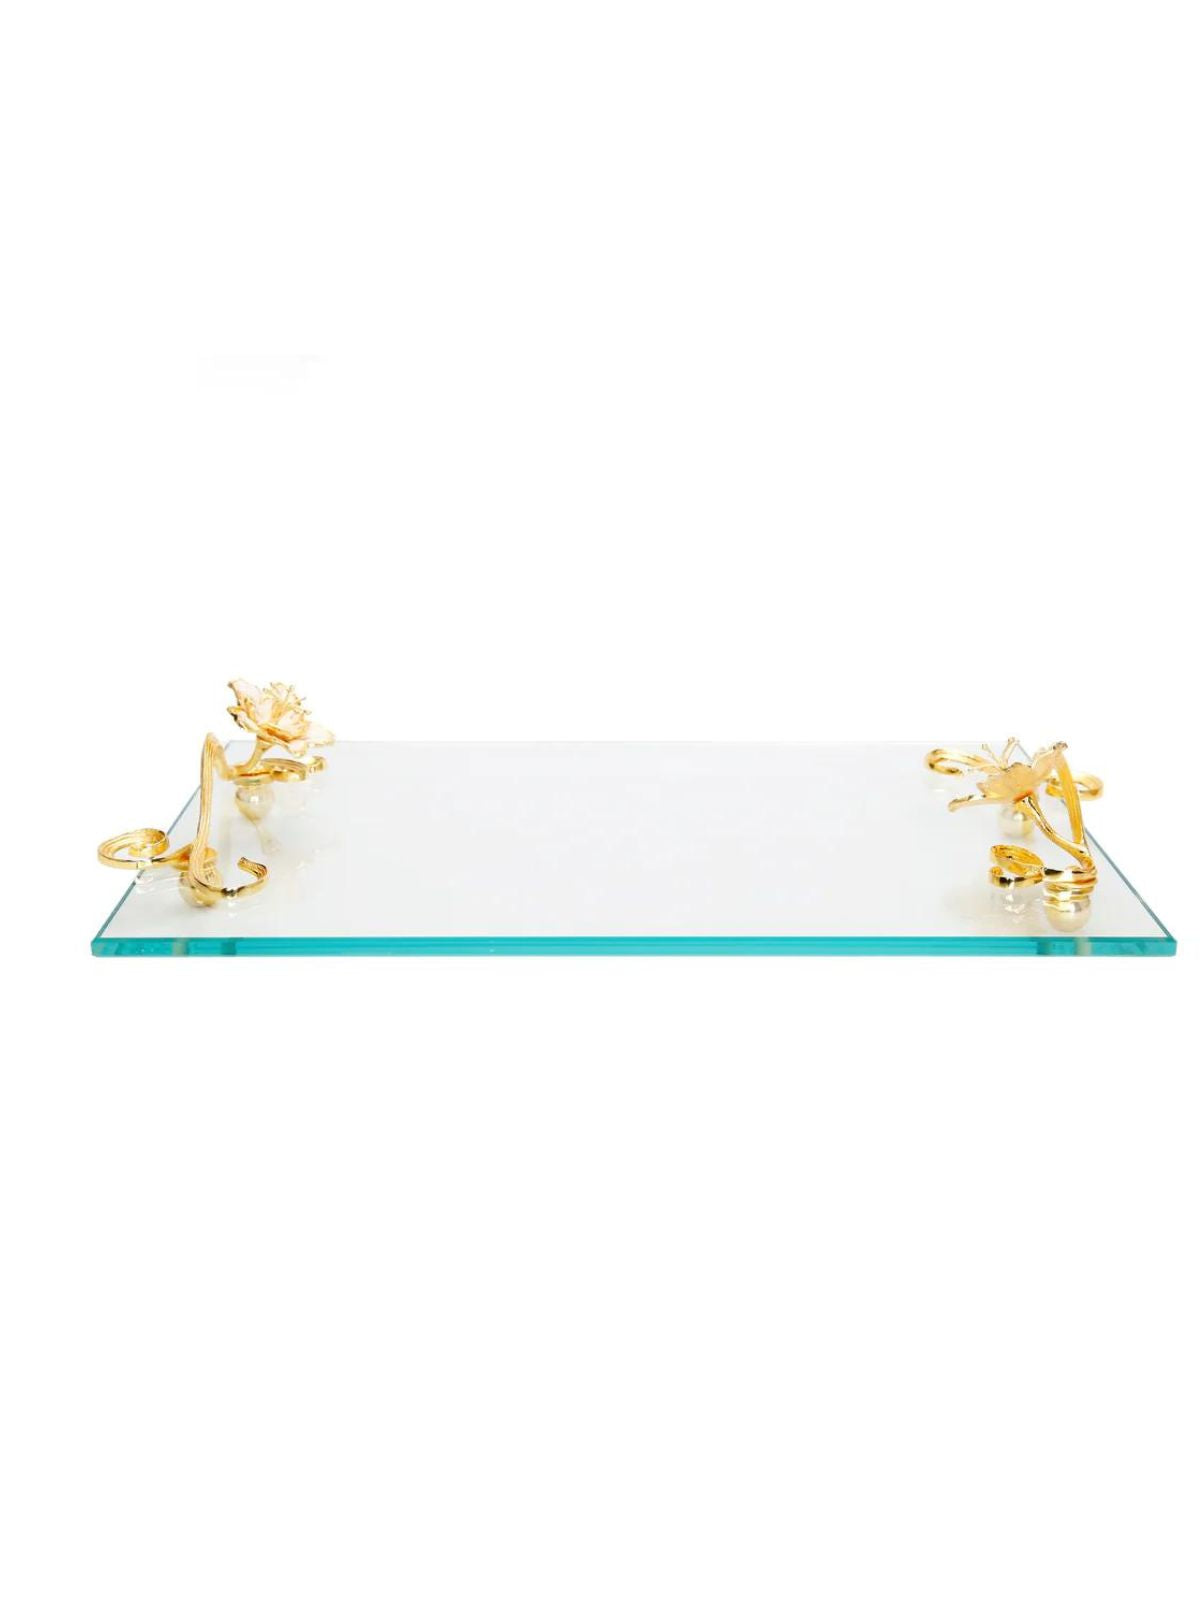 Rectangular Glass Tray with Gold and White Flower Designed Handles, sold by KYA Home Decor.